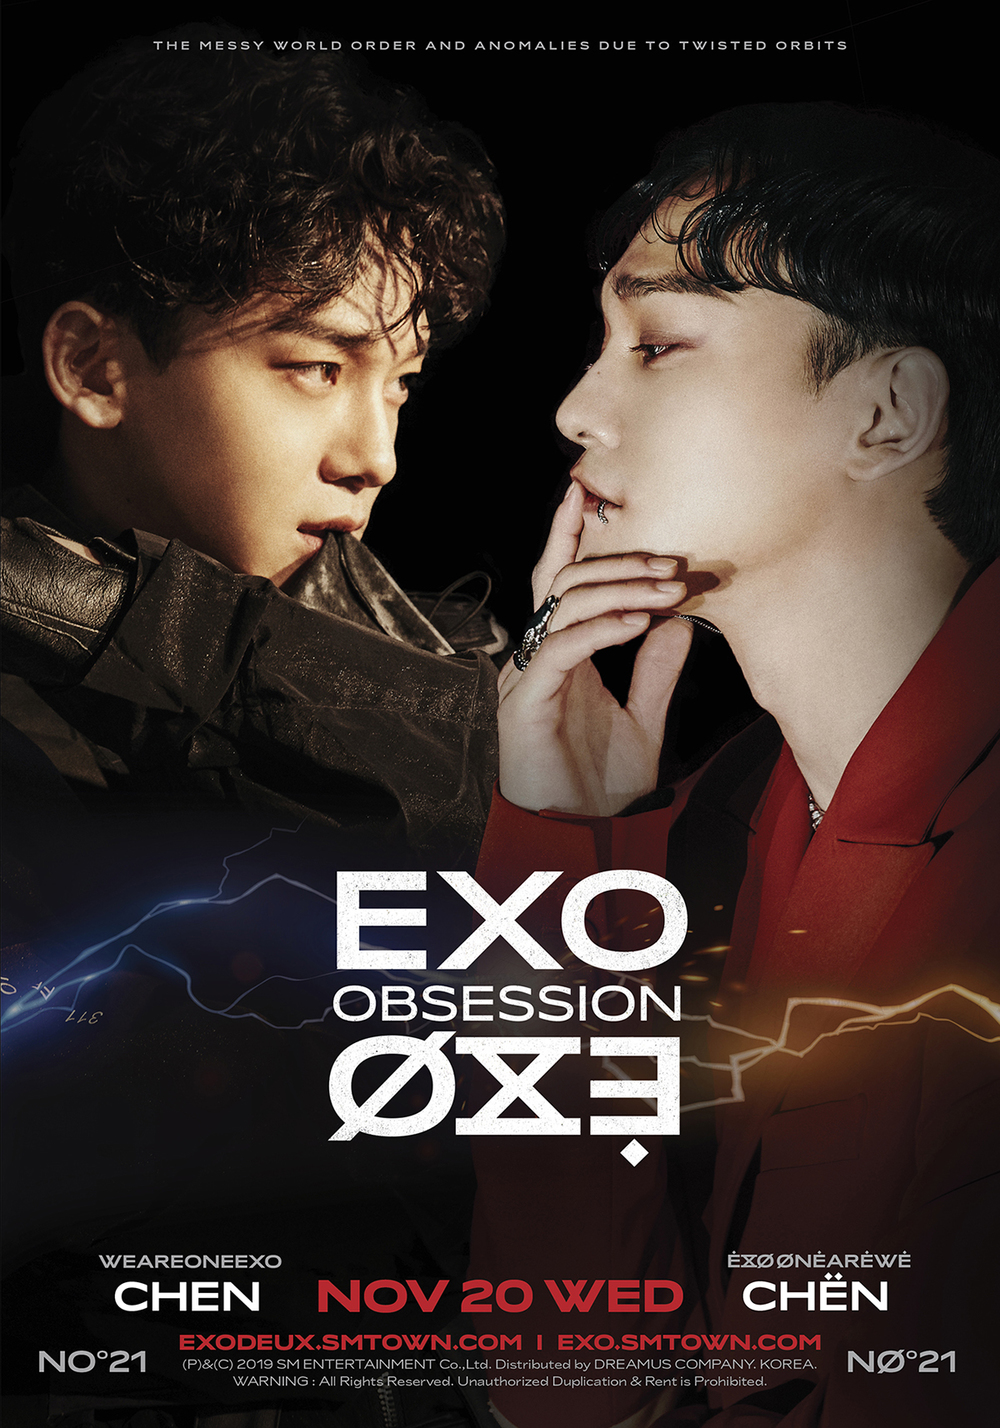 The group EXO (EXO) will perform various charm music with the songs Groove and Ya Ya (Ya Ya Ya Ya Ya) in the Regular 6th album.EXO Regular 6th album OBSESSION (Opsition) will be released on November 27 at 6 p.m. on various music sites including Melon, Flo, Genie, iTunes, Apple Music, Sporty Pie, QQ Music, Cougu Music and Couwer Music.It contains a total of 10 songs from various genres, including Korean and Chinese versions of the title song Obsession, which allows you to meet EXOs own hip energy.The song Groove is a dreamy dance song that combines rhythmic chorus, string, and flute sound.I painted a picture of a lover sharing a sad feeling as if she crossed reality and dreams through dance.Ya Ya is a hip-hop dance song that sampled and reinterpreted the female R&B vocal trio SWVs You Are The One (You A The One) in EXO style, and stands out with 808 bass with a sense of weight, an addictive chorus, and lyrics that confidently express the belief in love that started for a moment.The teaser image of Chen, a member of EXO and X-EXOs various SNS accounts at 0:00 on the 20th, further amplified the expectation of comeback by showing EXO Chen, who is impressed with his understated charisma, and X-EXO Chen, who emits an overwhelming atmosphere with cool eyes.EXO Regular 6th album OBSESSION will be released on November 27th as a record.hwang hye-jin